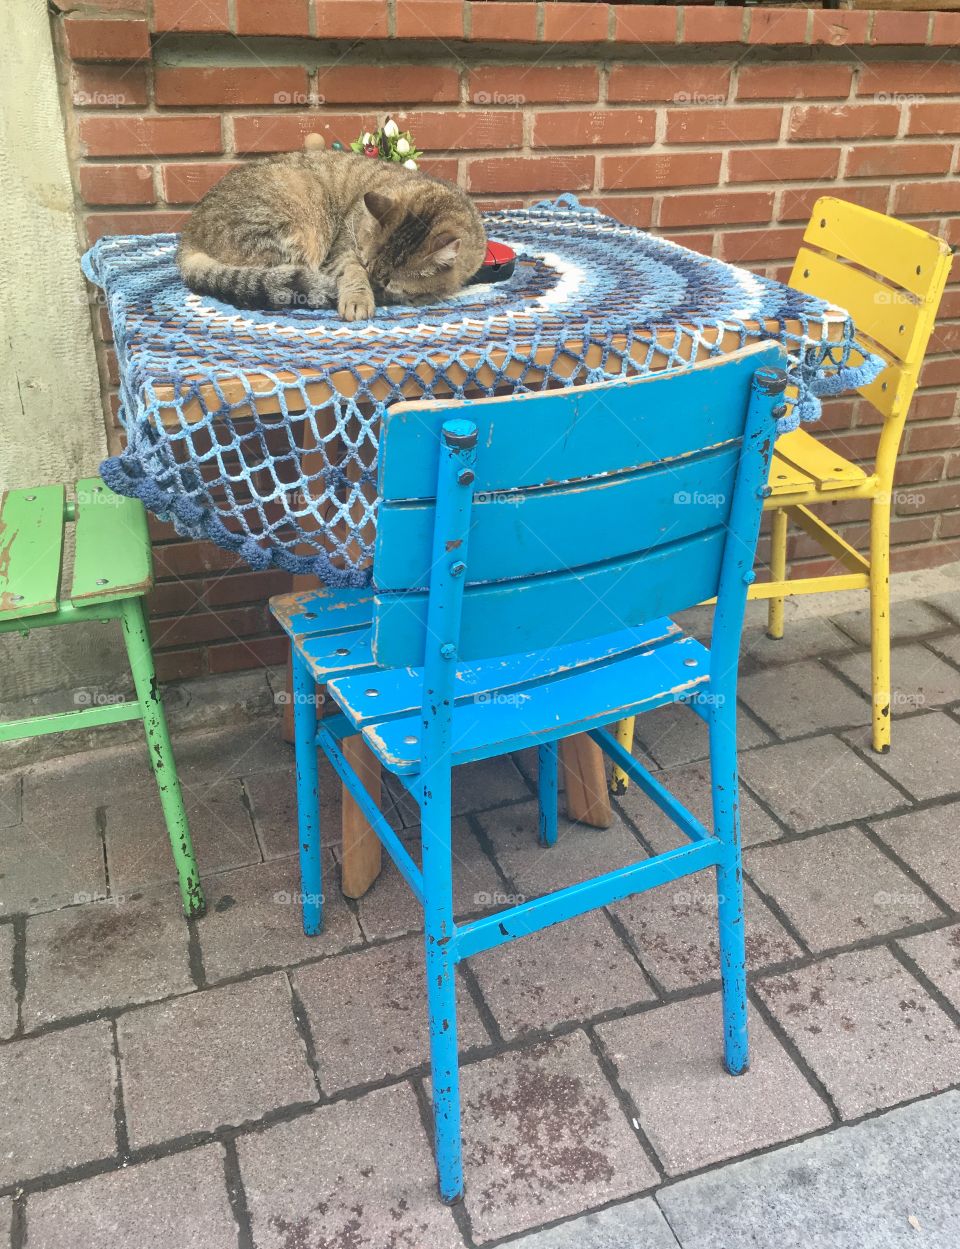 Cat and colorful table and chairs, Turkey 